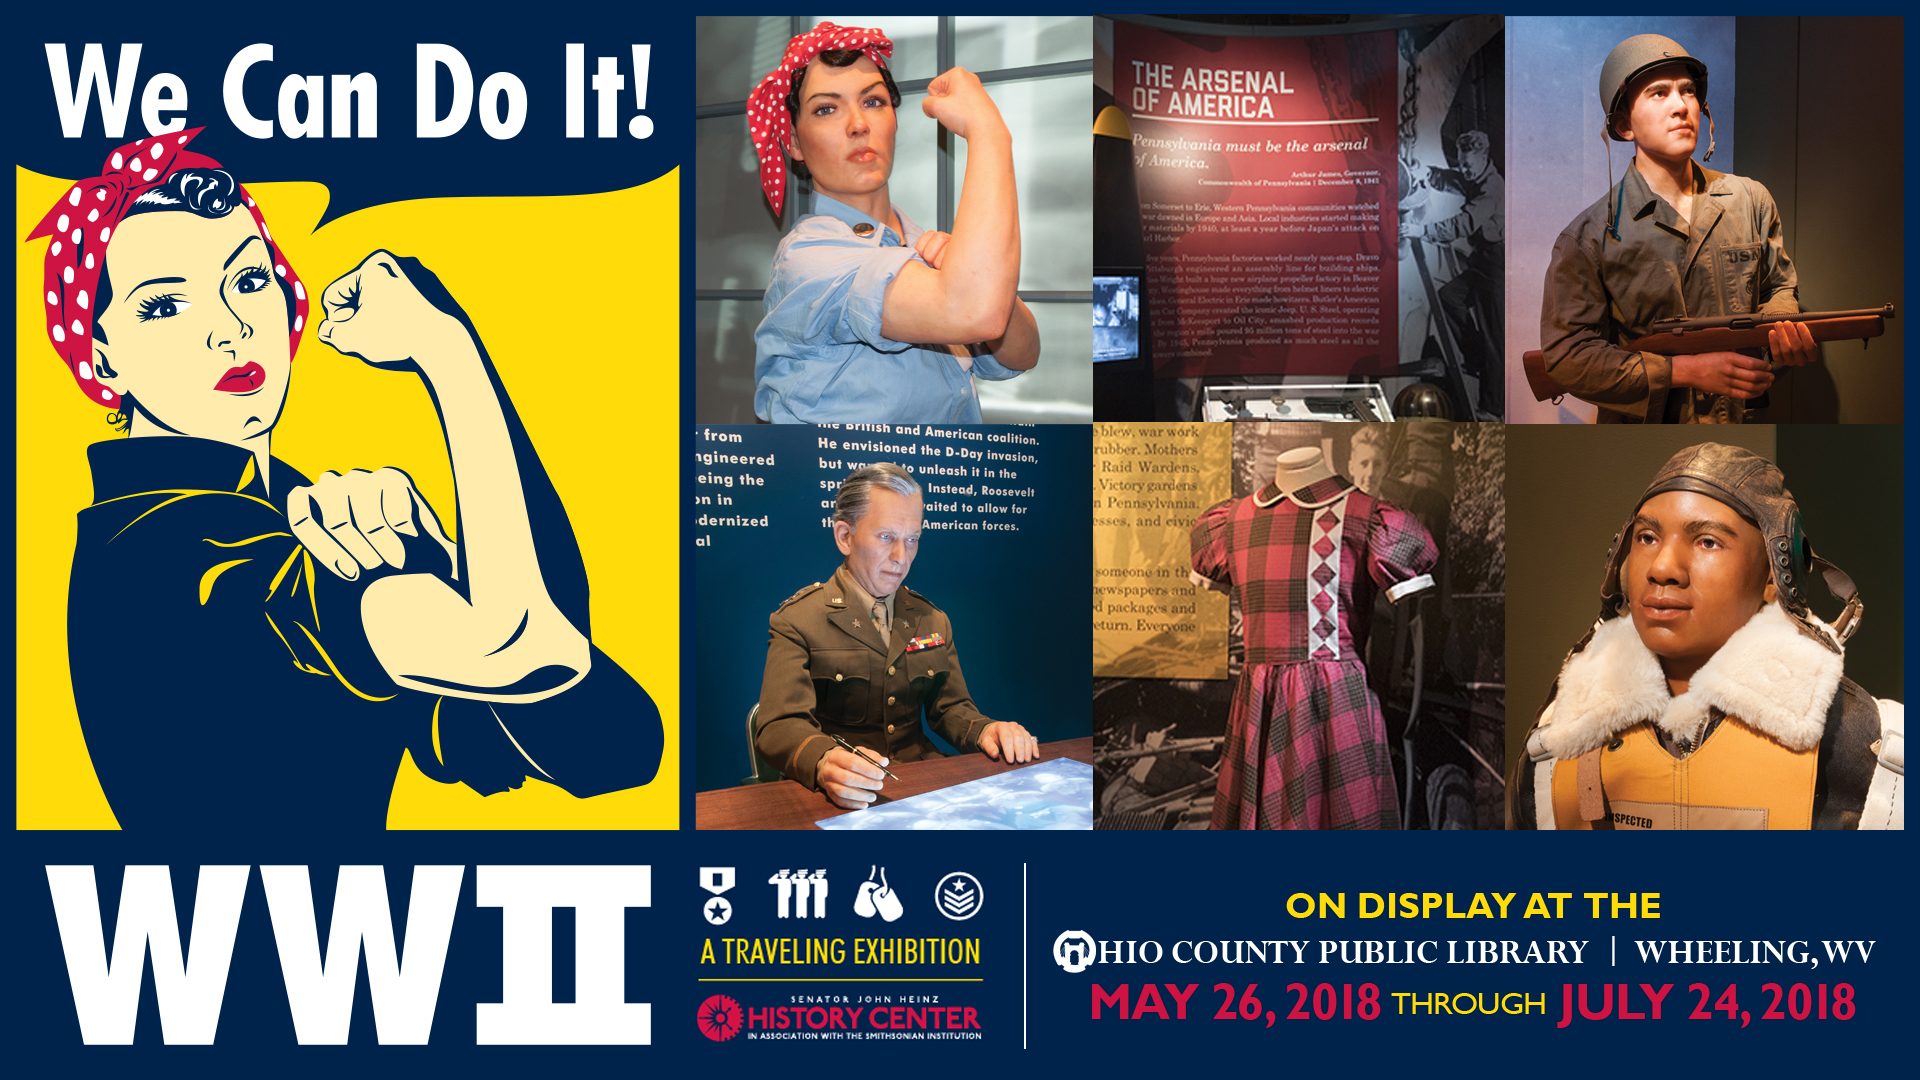 Heinz History Center WWII Traveling Exhibit will be at the Ohio County Public Library from May 26 to July 24, 2018/